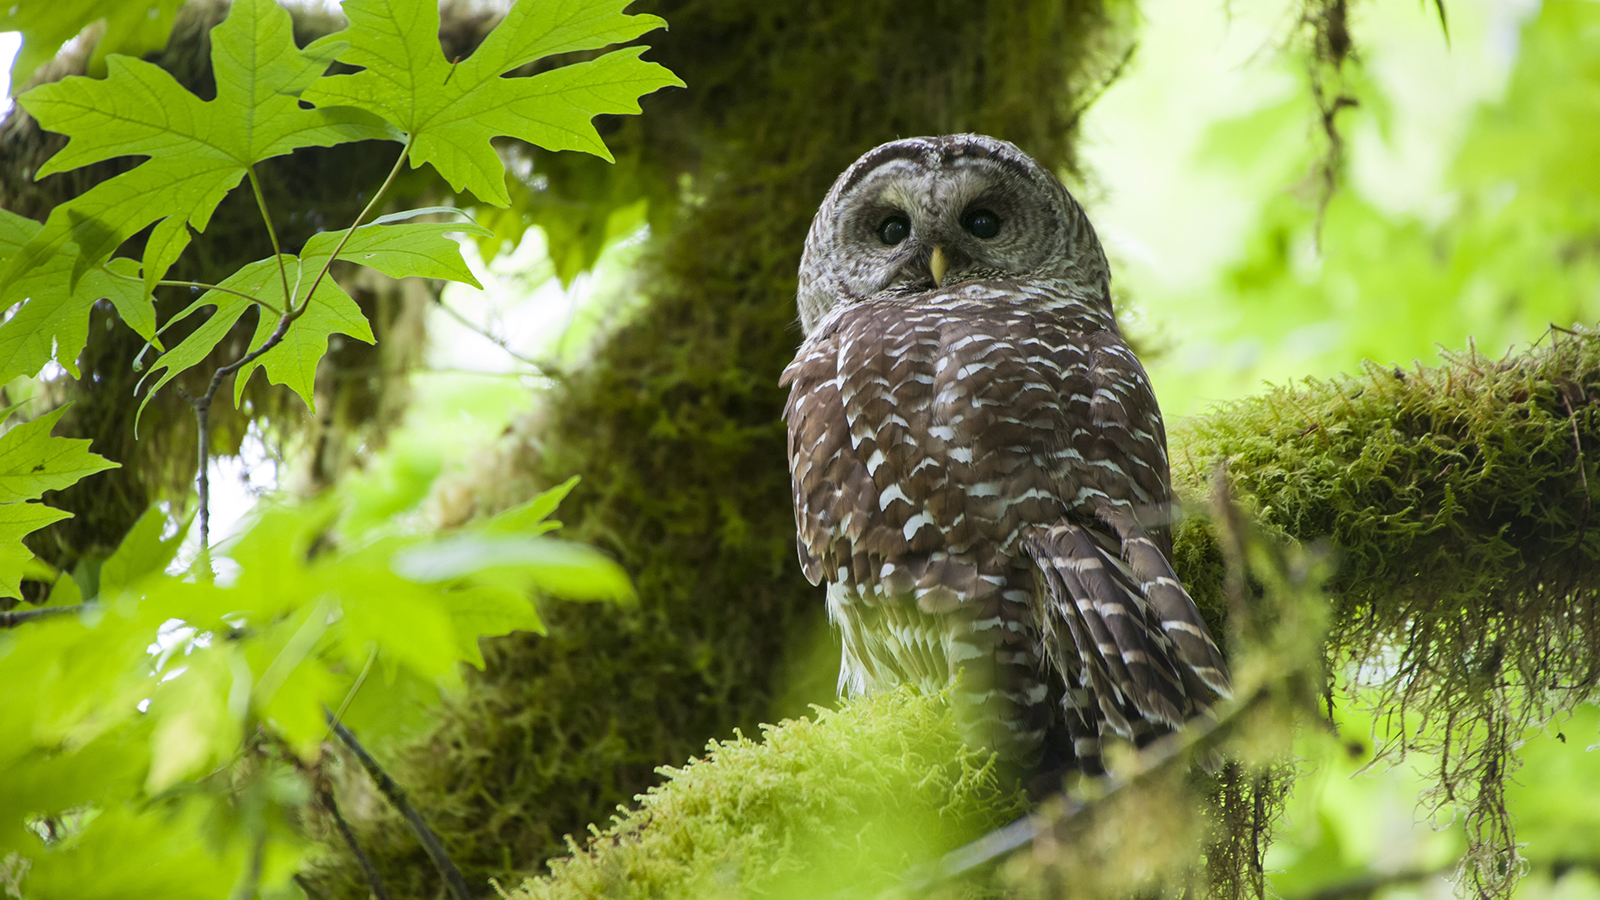 A Spotted Owl sitting on a branch